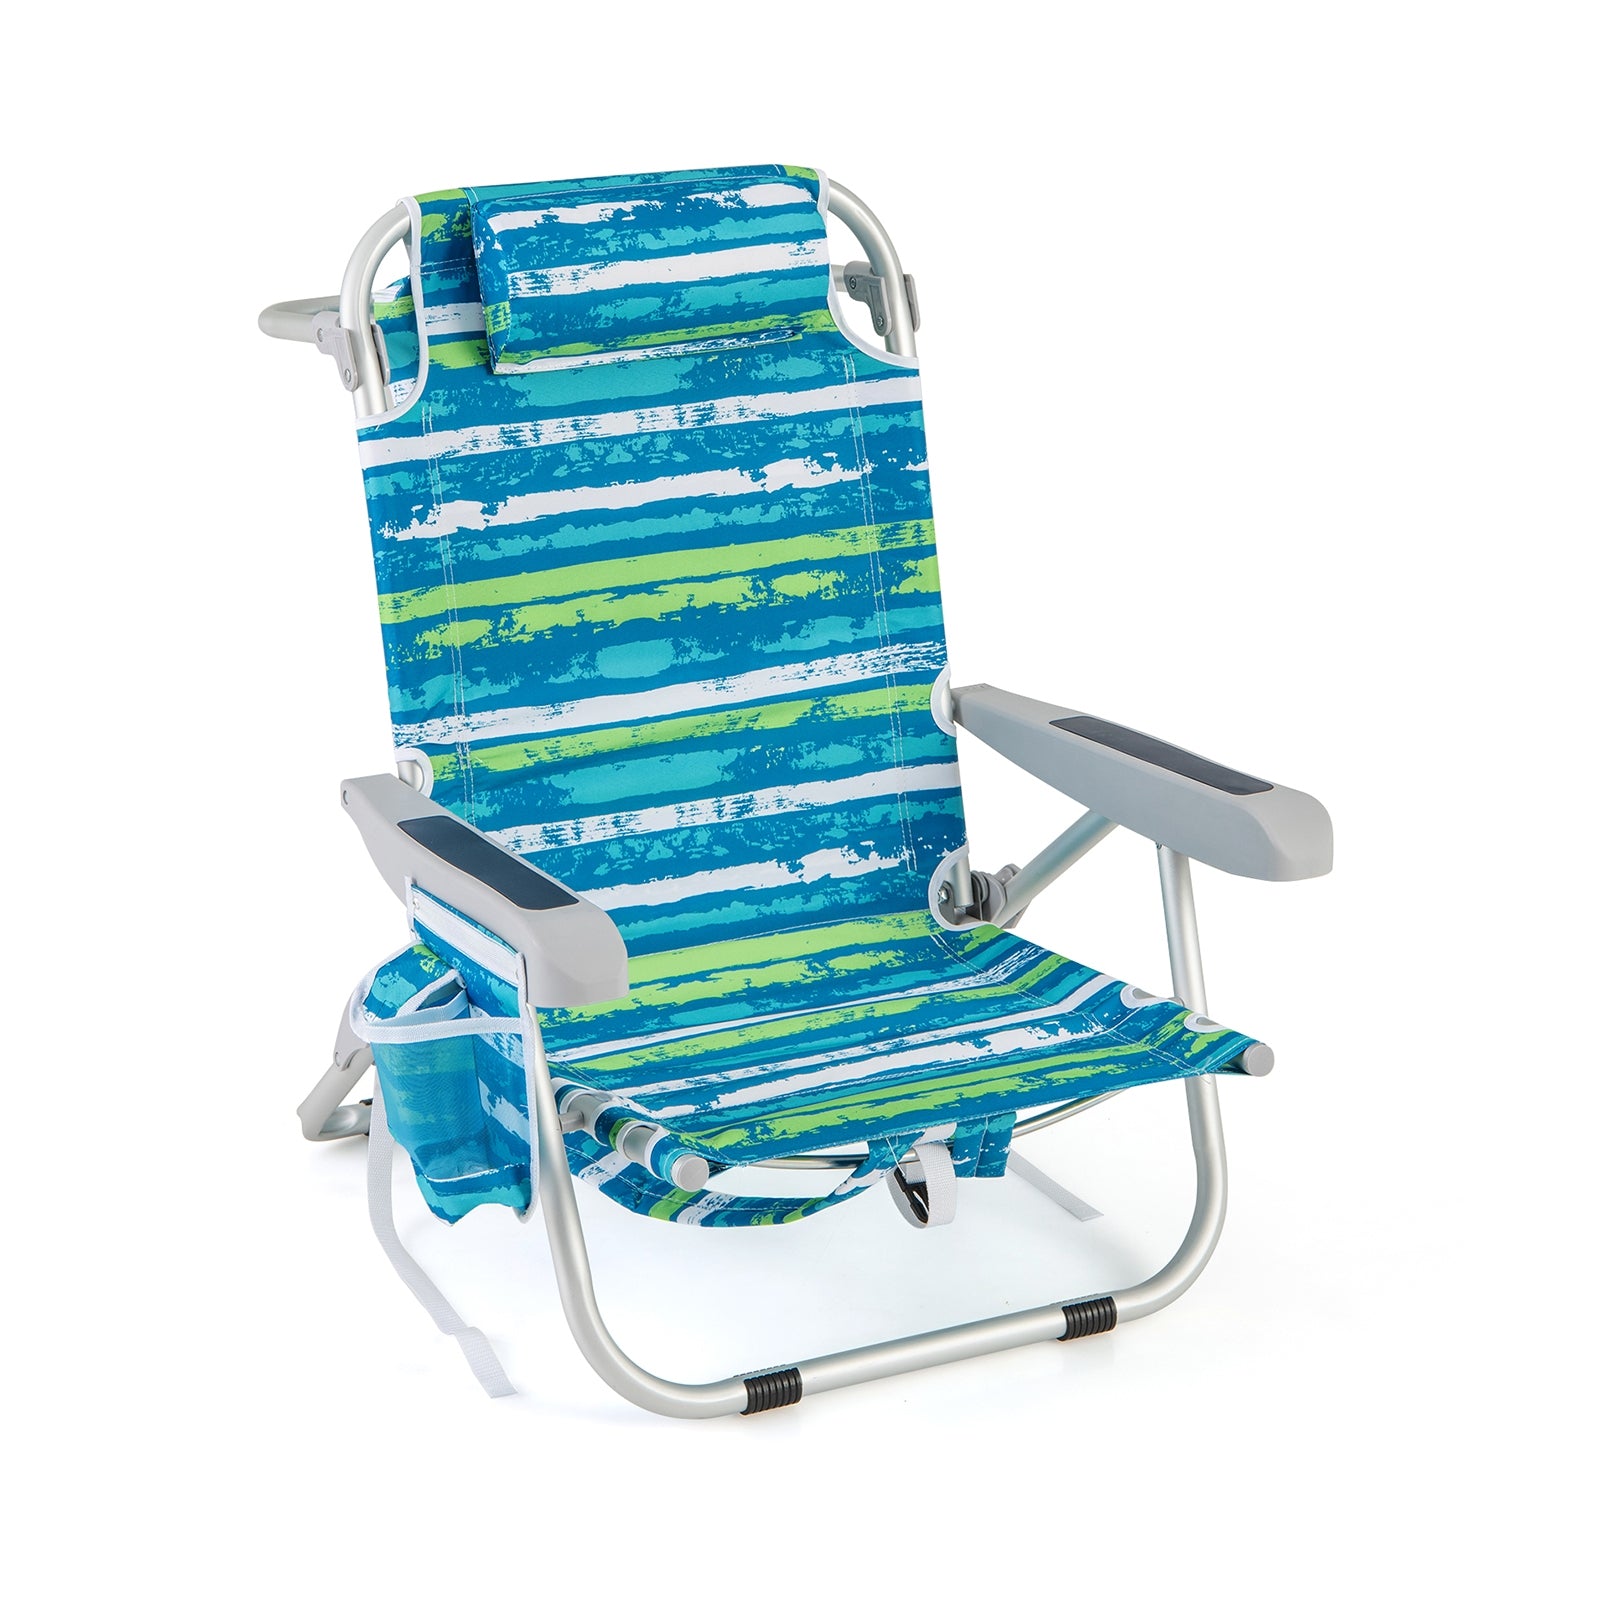 Fordable Backpack Beach Chair with cupholder and Storage Pockets for Outdoor-Blue and Green, Blue & Green